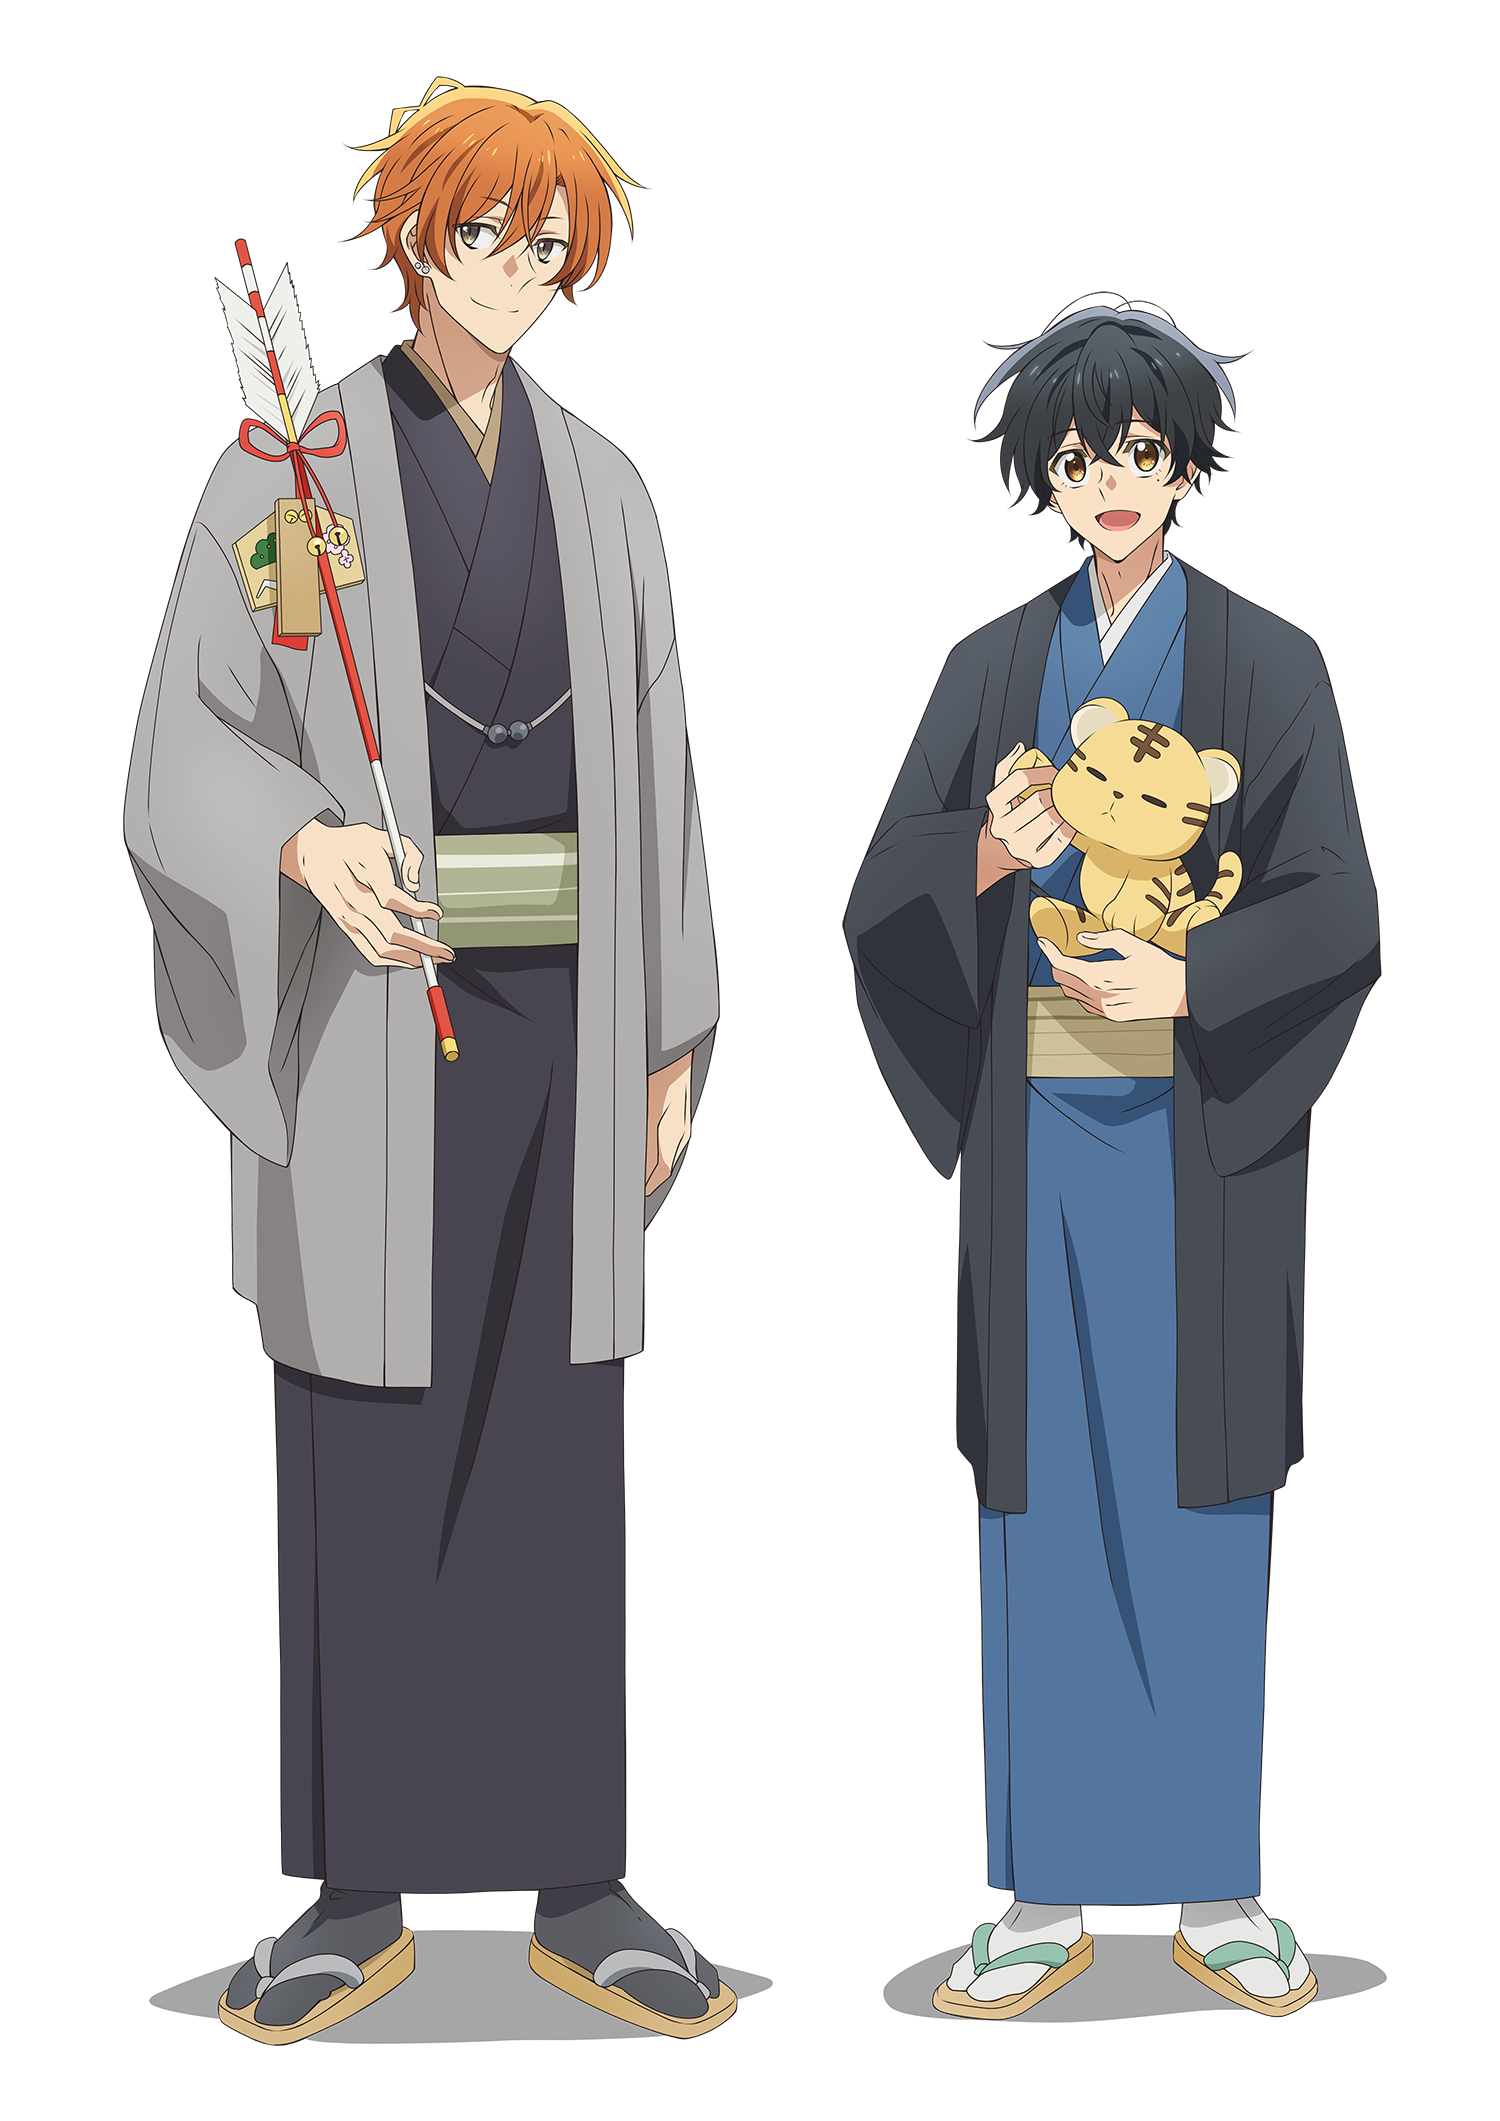 A promotional visual for the upcoming Sasaki and Miyano TV anime featuring the lead characters, Sasaki and Miyano, dressed in ceremonial kimonos. Sasaki carries a blessed arrow, while Miyano carries a stuffed tiger doll representing the upcoming Year of the Tiger.